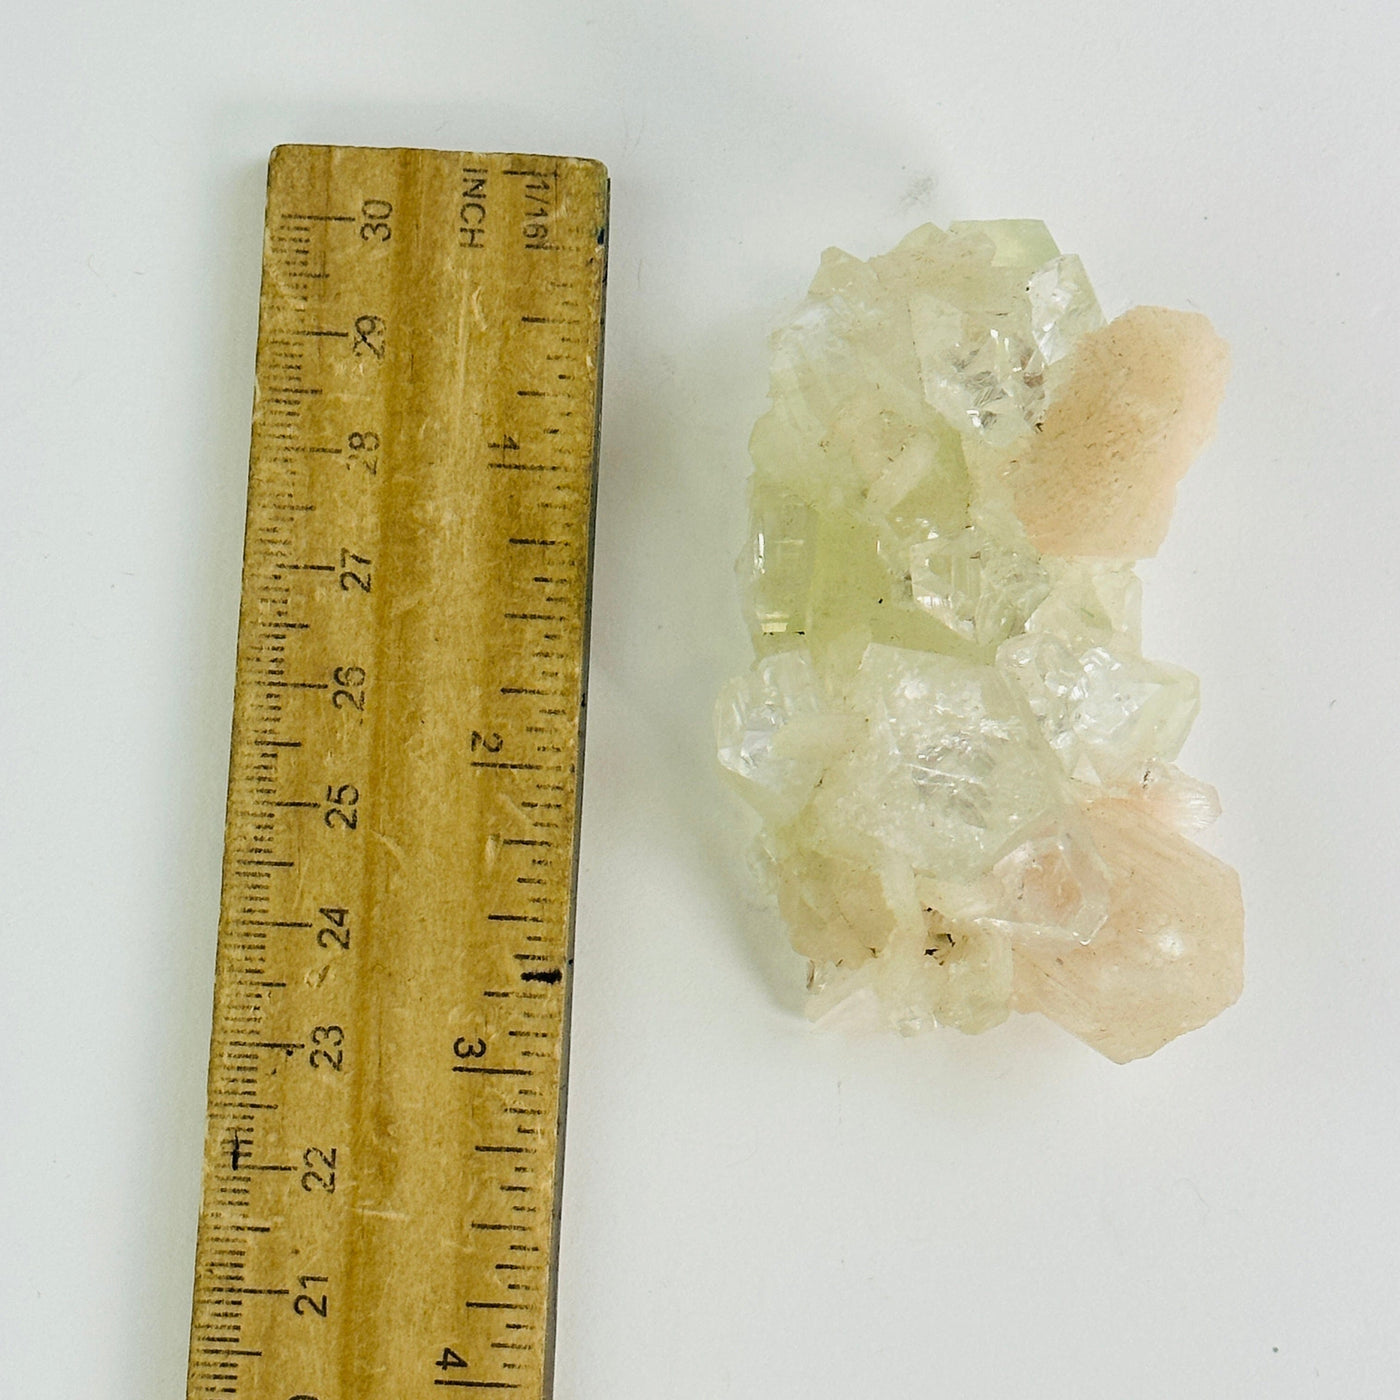  peach apophyllite with stilbite cluster next to a ruler for size reference